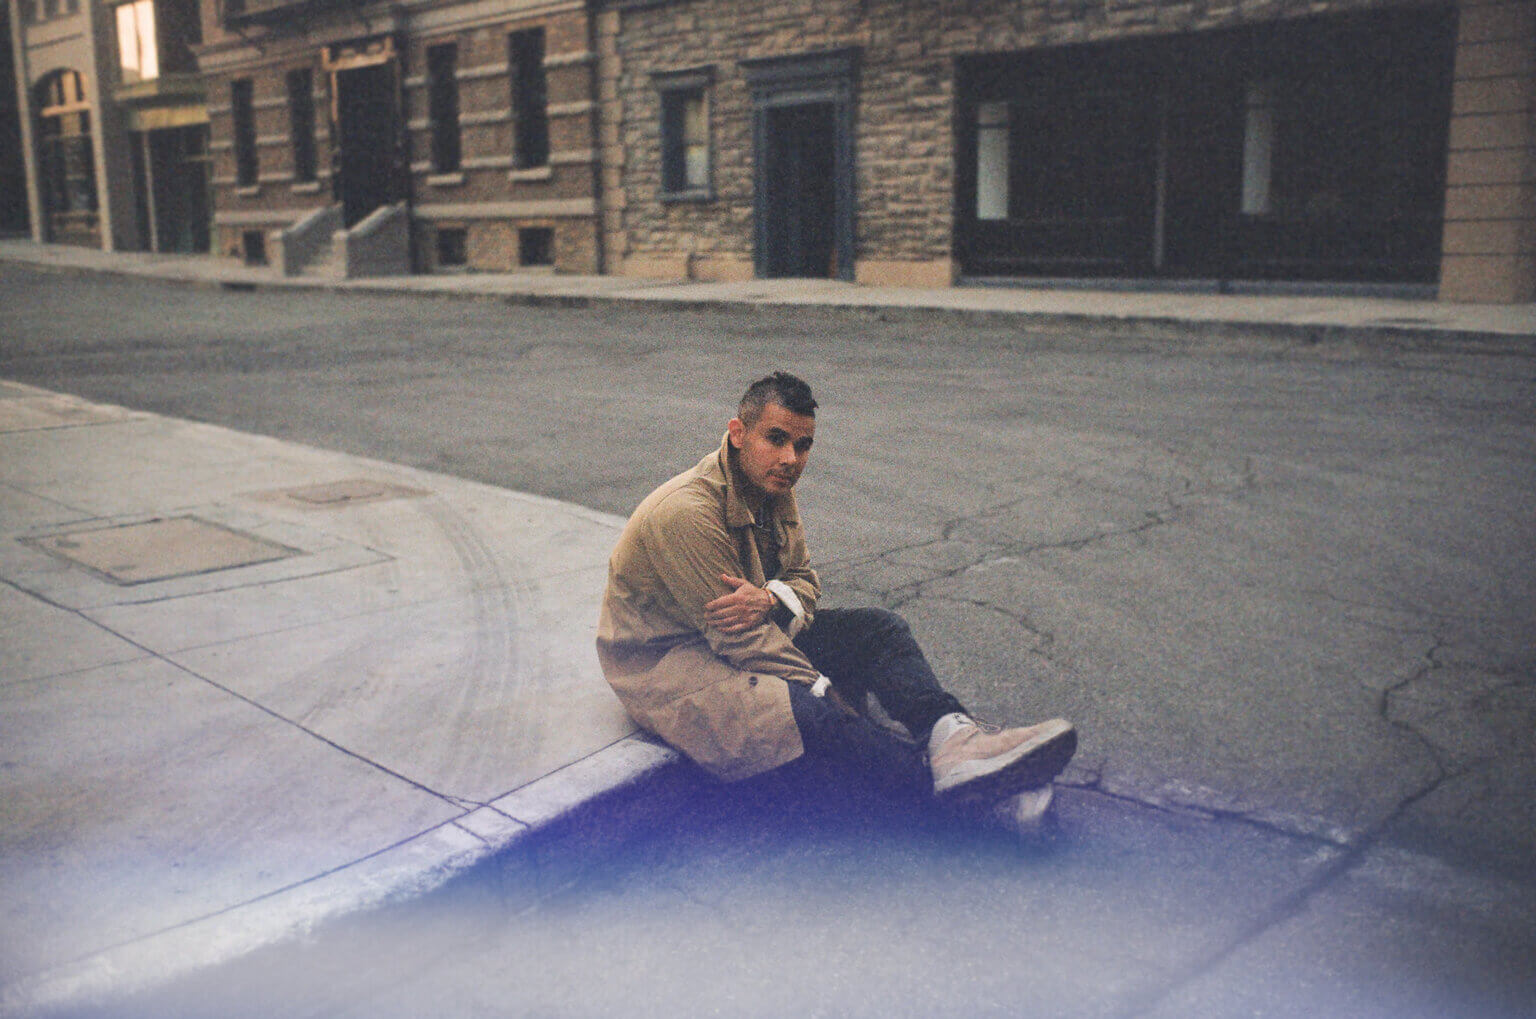 Rostam has shared a new video for “These Kids We Knew”, The track follows previous releases “Unfold You.” The song is another glimpse